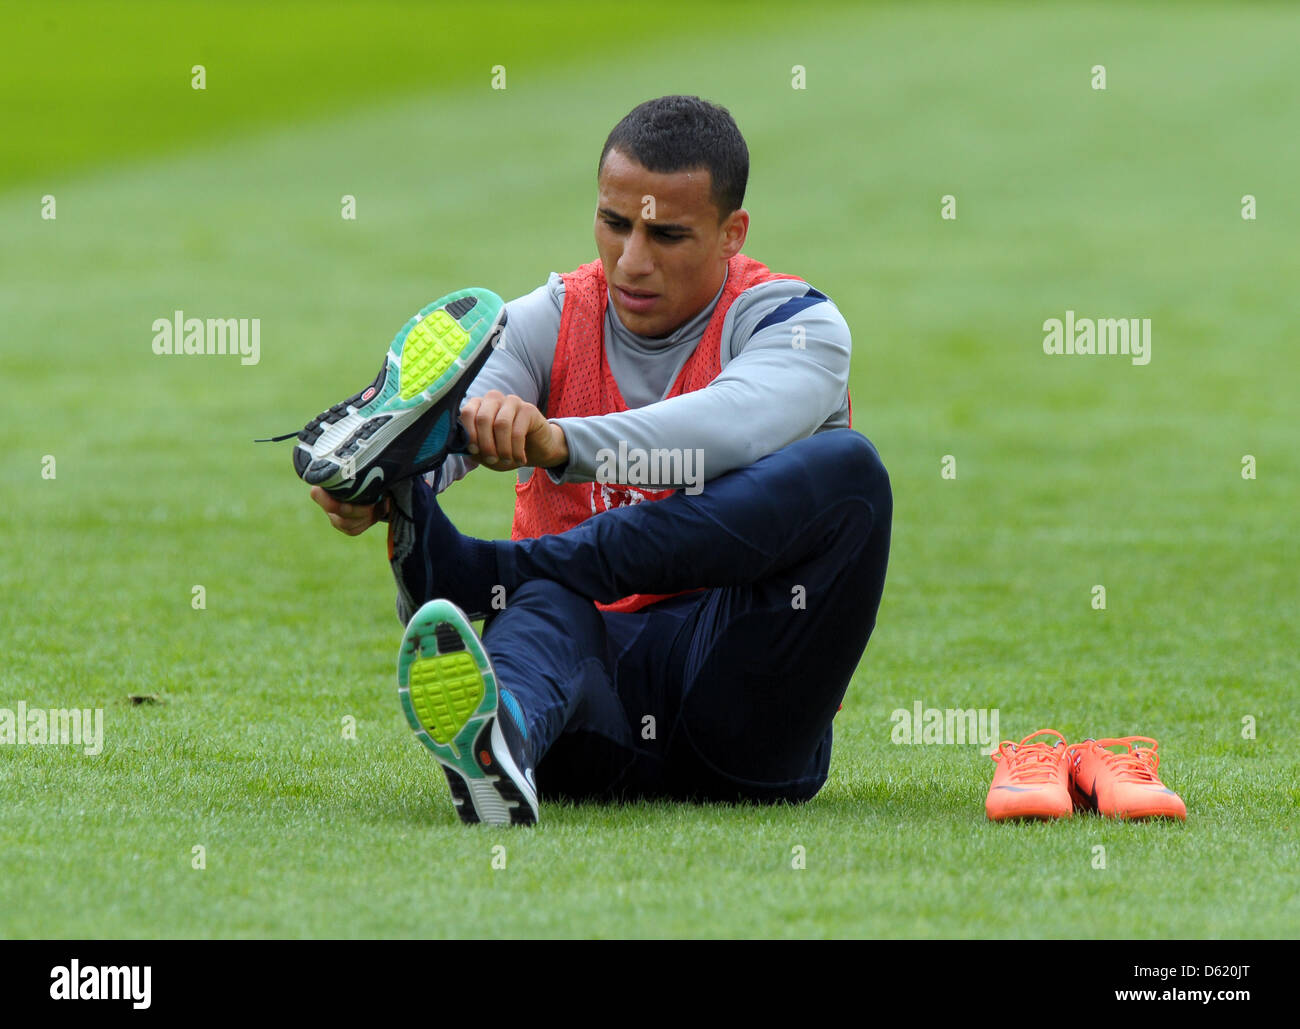 Hertha BSC's Anis Ben-Hatira puts on his shoes during a training session of German Bundesliga soccer club Hertha BSC in Berlin, Germany, 07 May 2012. Hertha BSC will face Fortuna Duesseldorf for a relegation round match on 10 May 2012. Photo: Soeren Stache Stock Photo